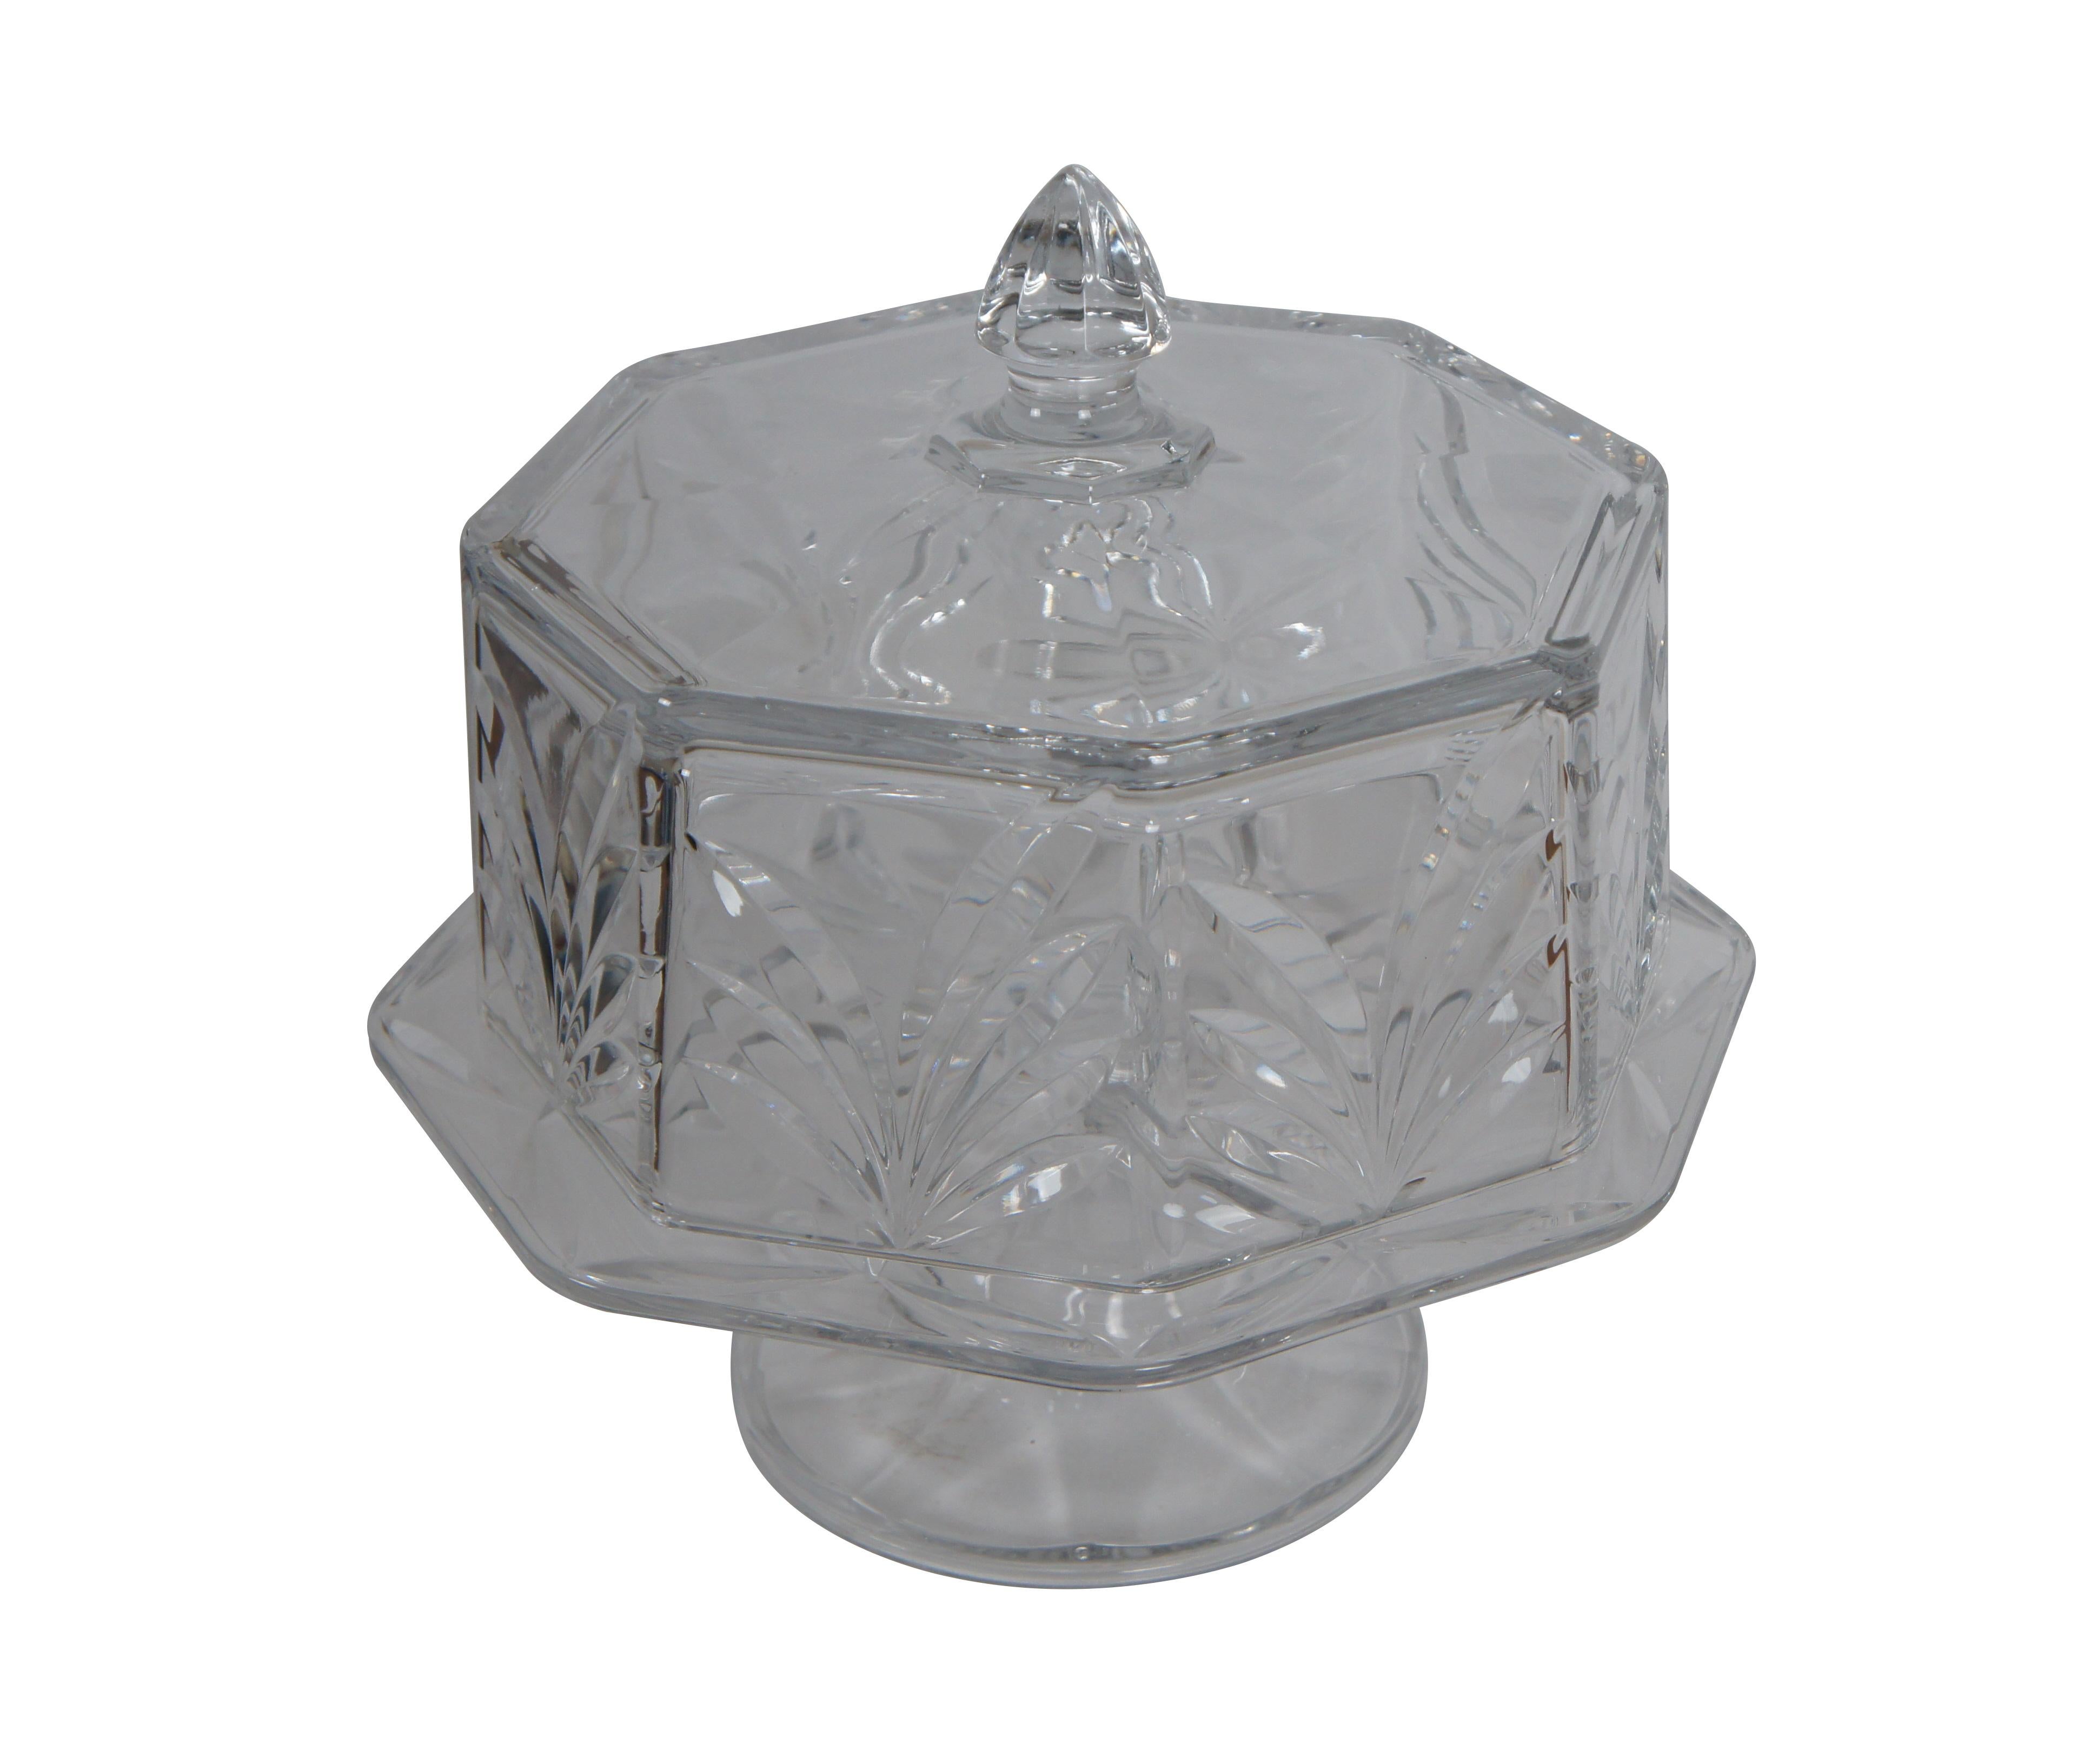 Vintage heavy cut crystal cake plate stand featuring octagonal form with domed finial top and footed base.

Dimensions:
13.5